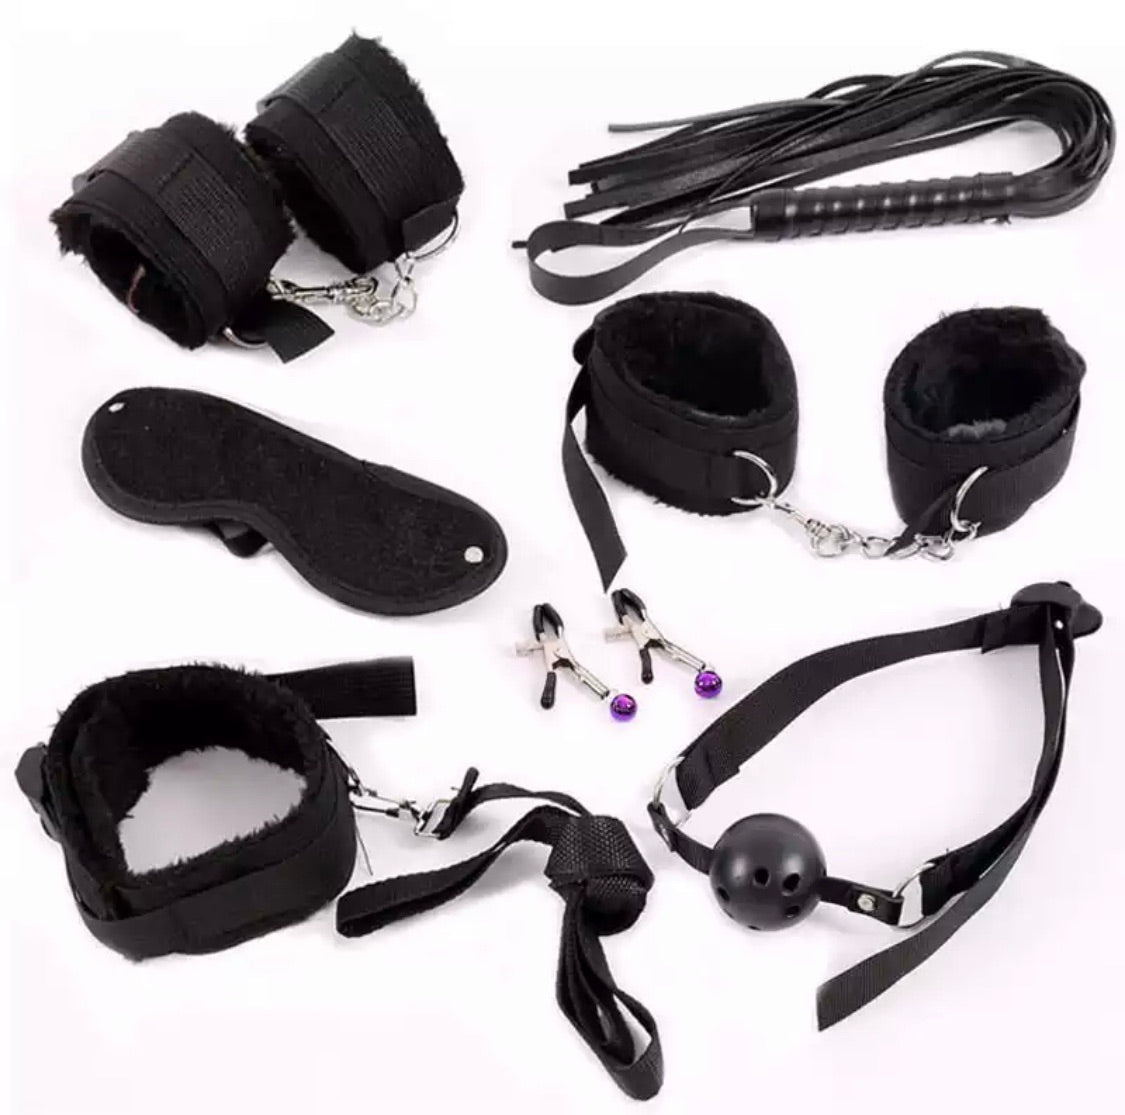 DDLGVERSE 7pcs Bondage set; handcuffs, anklecuffs, flogger, blindfold, collar and leash, nipple clamps, ball gag in black